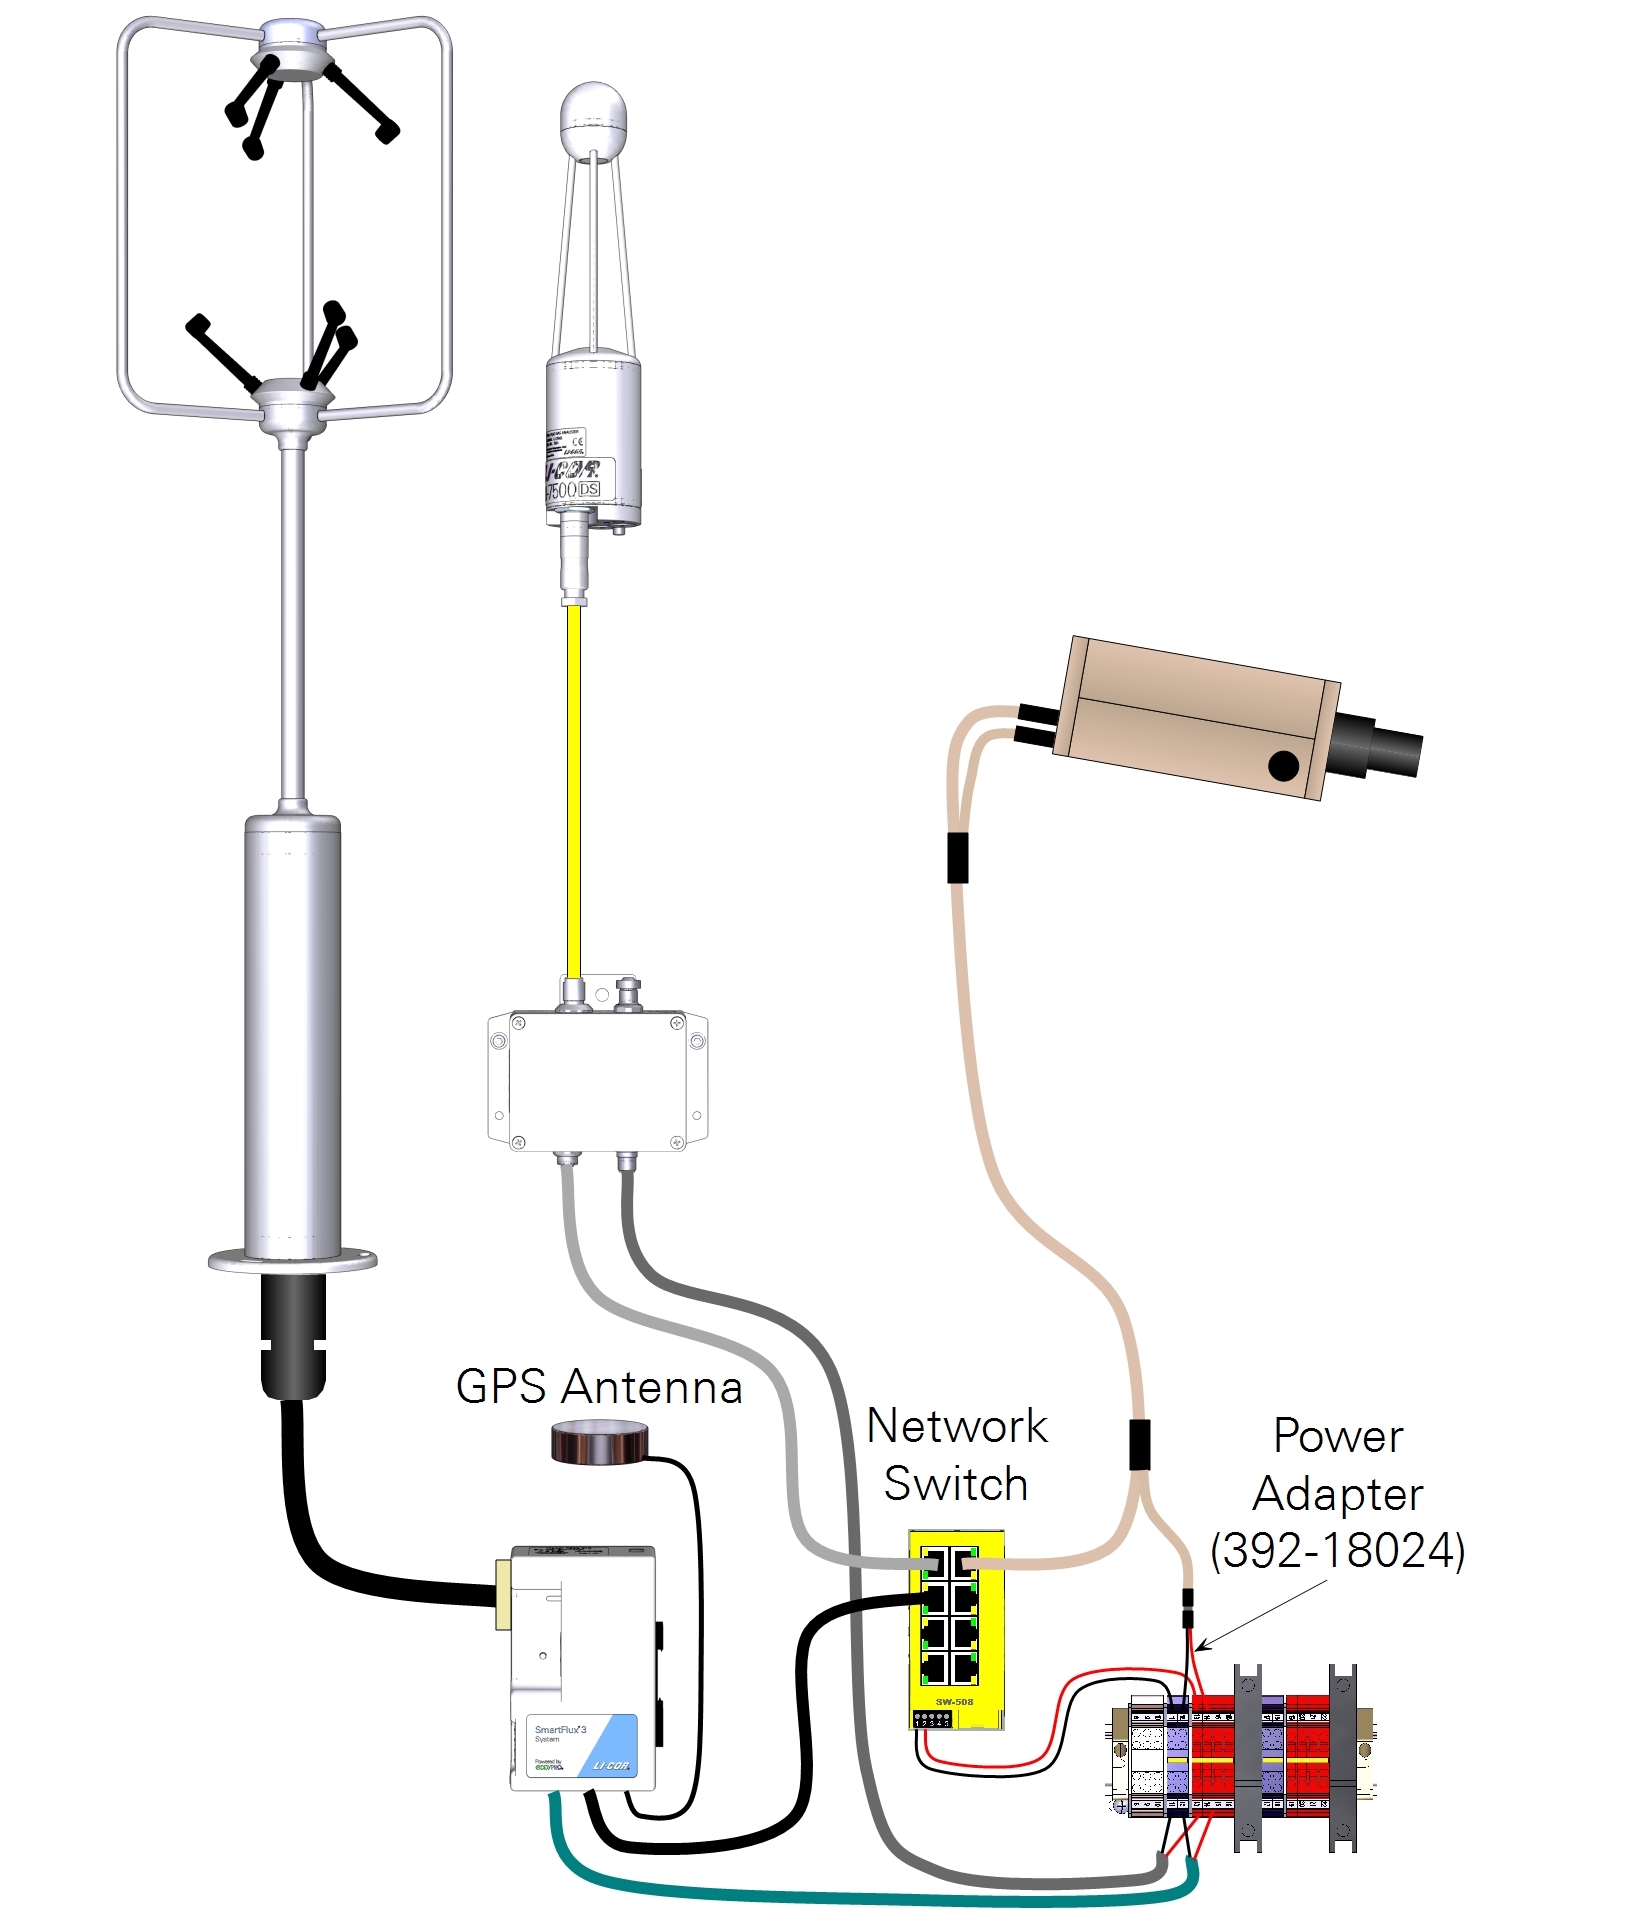 Connect the Phenocam to the eddy covariance system via the network cable